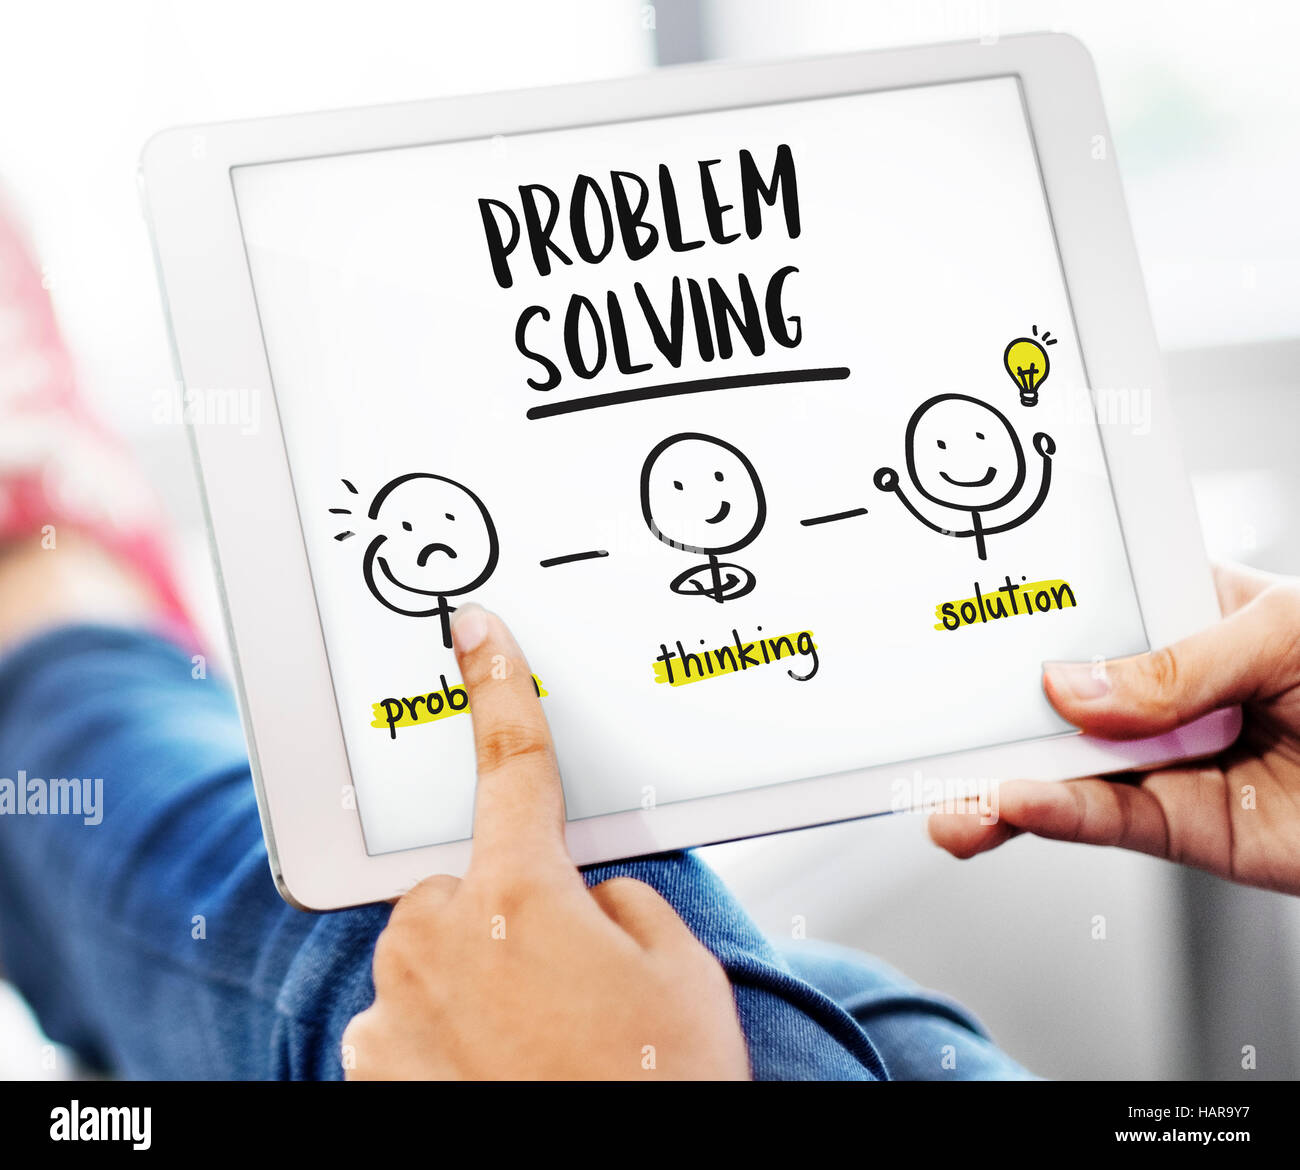 Problem Solving Creative Thinking Brainstorm People Concept Stock Photo Alamy